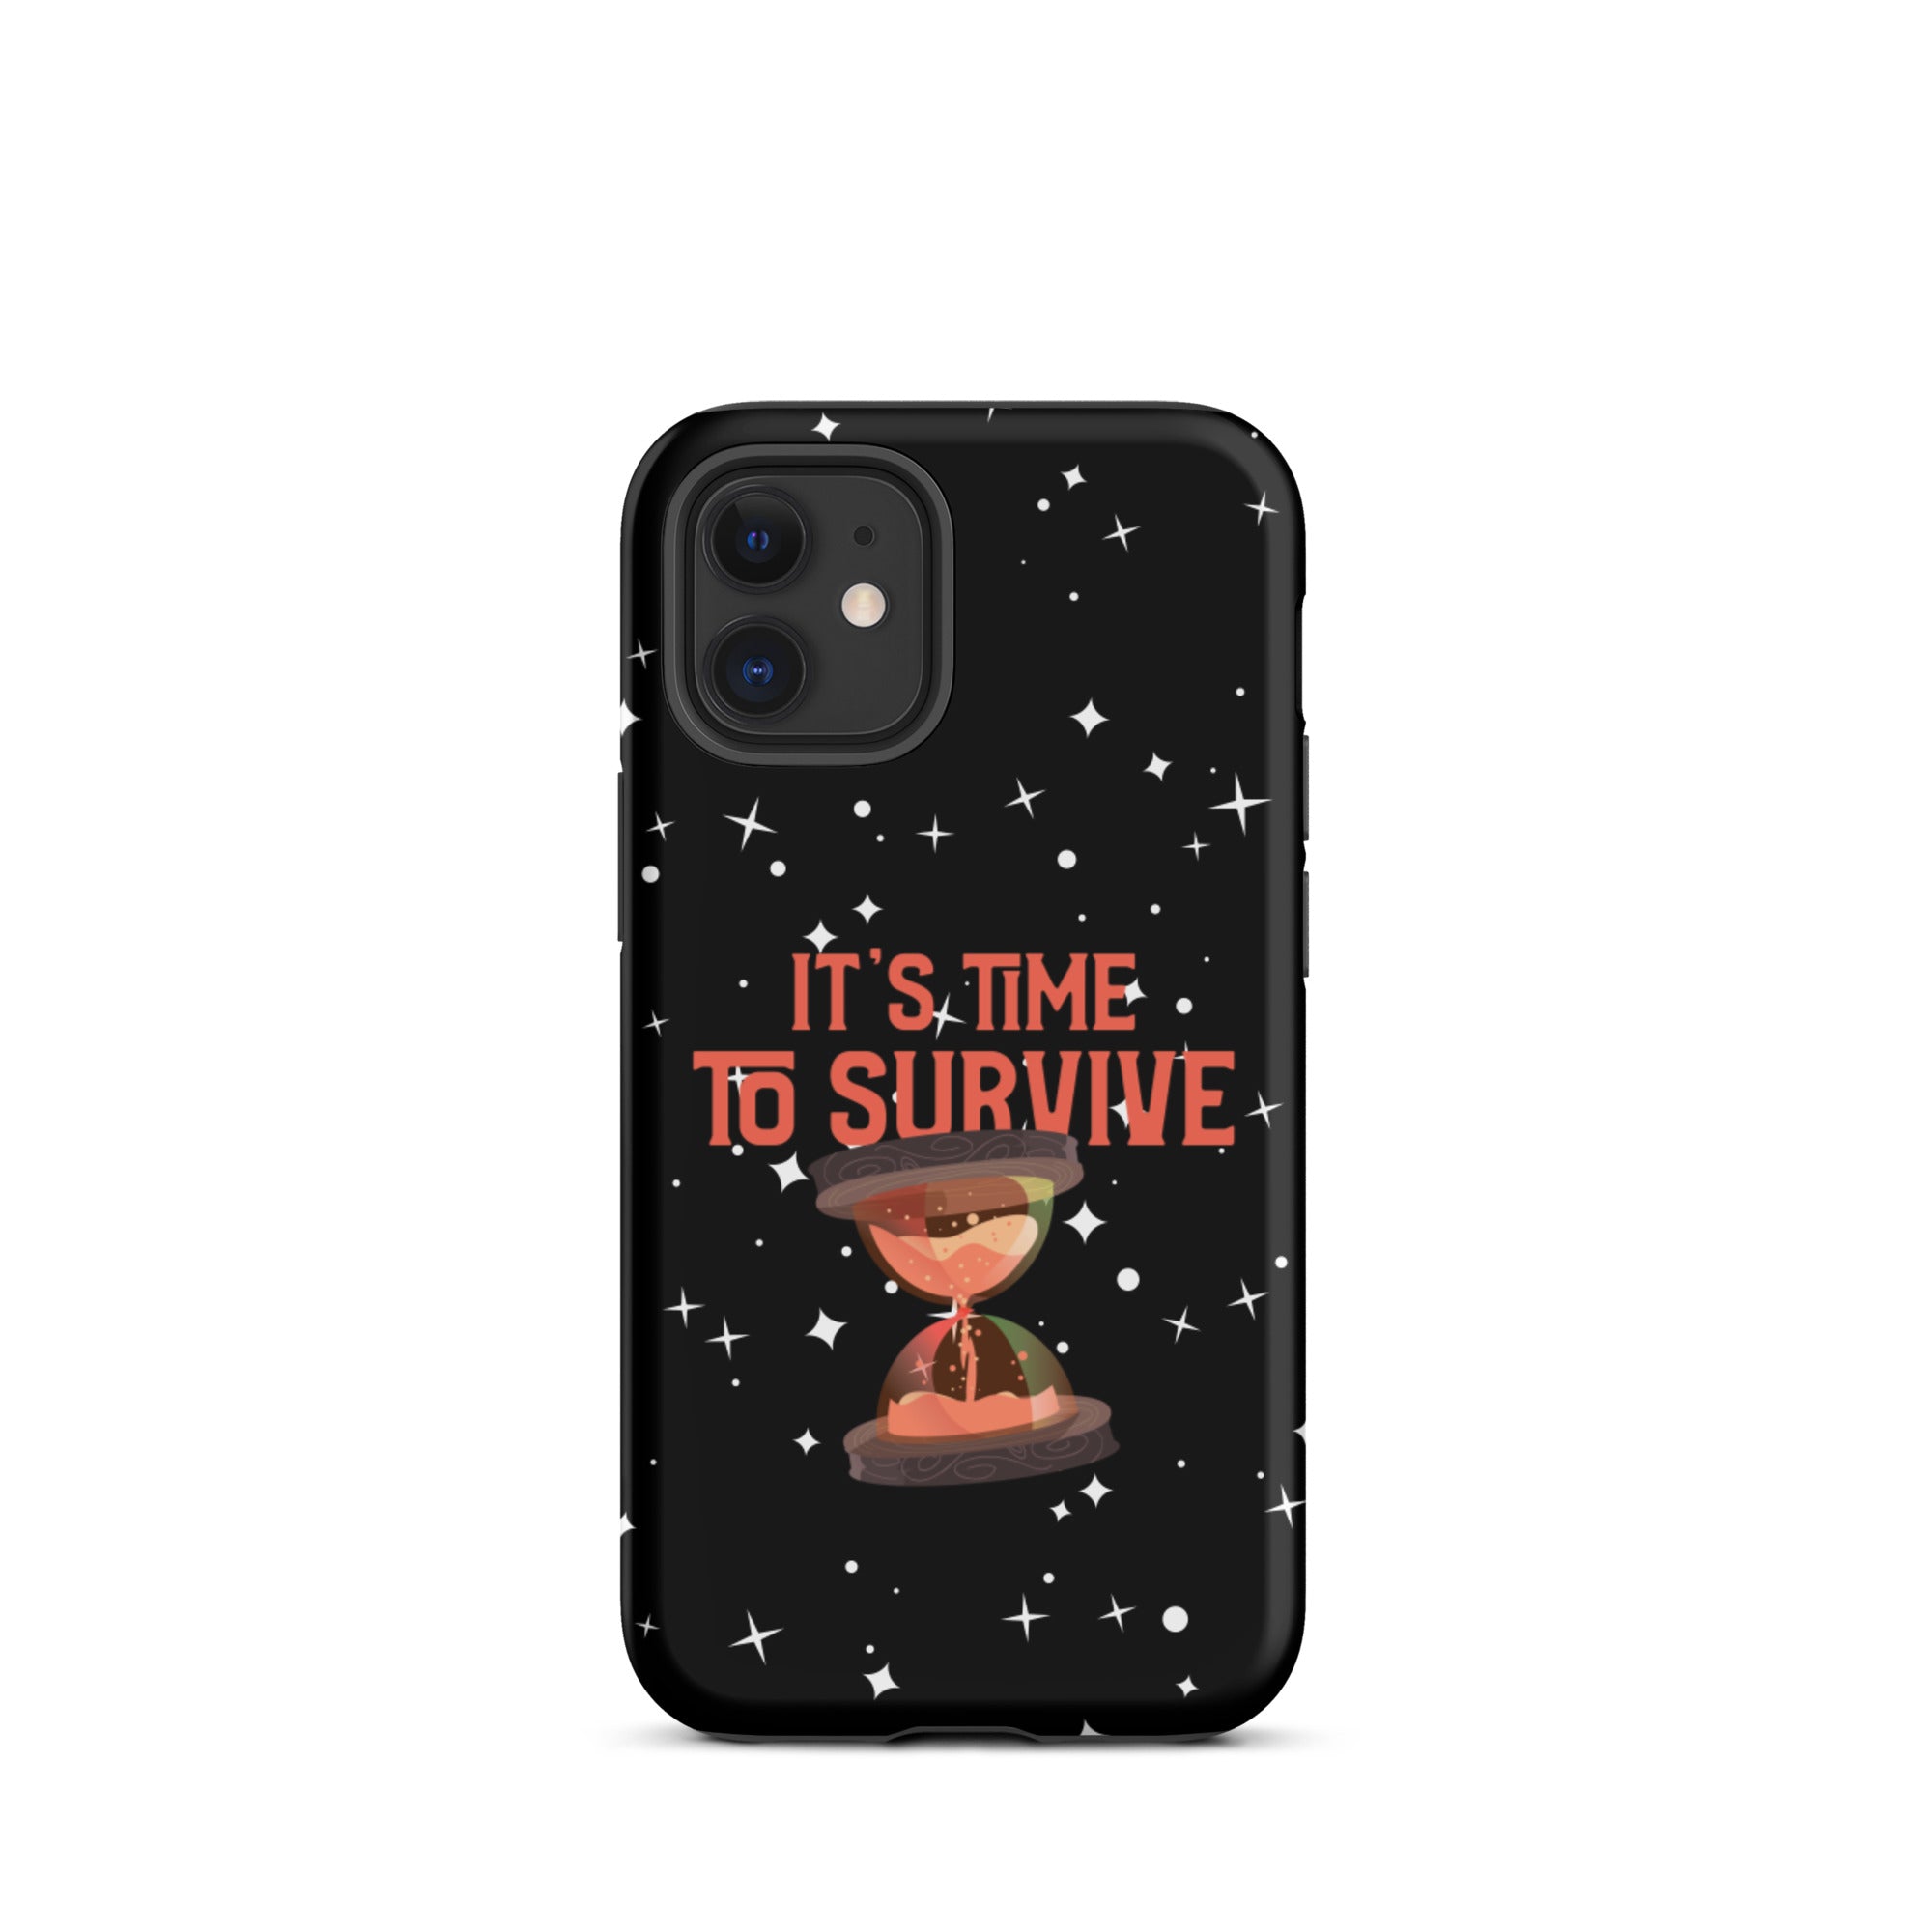 Its time to survive - Tough iPhone case